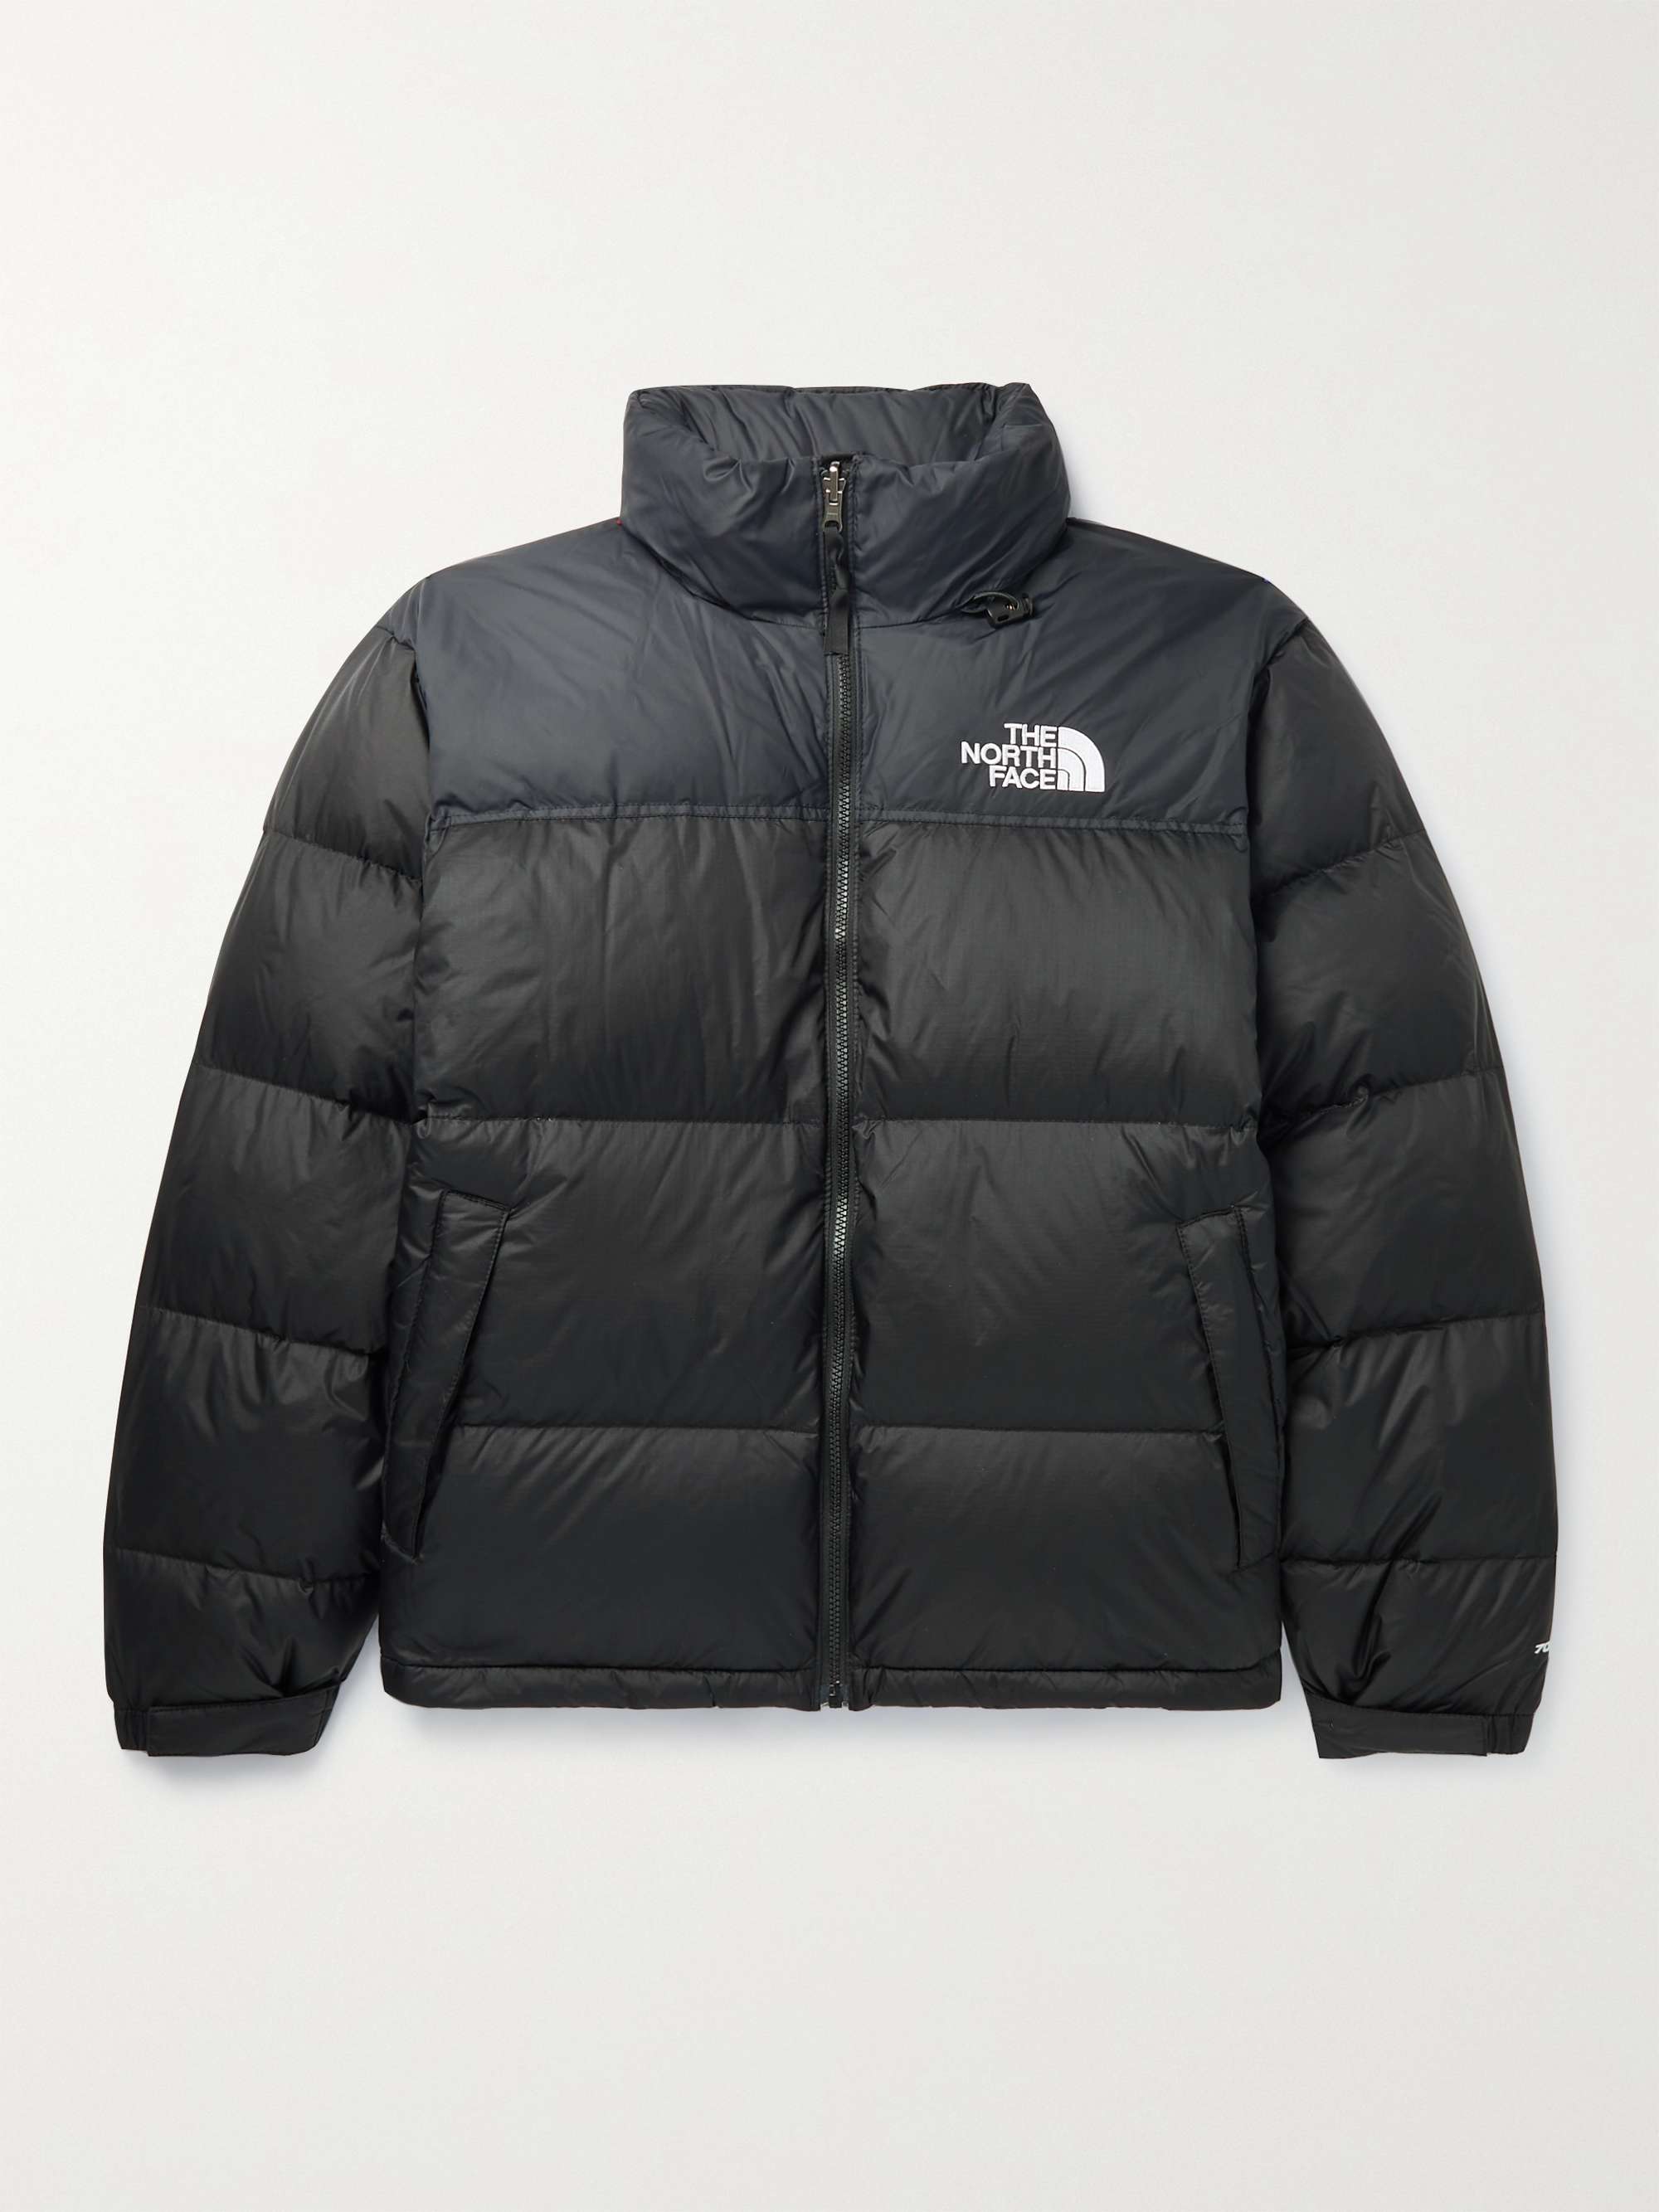 THE NORTH FACE 1996 Retro Nuptse Quilted Nylon and Ripstop Down Jacket